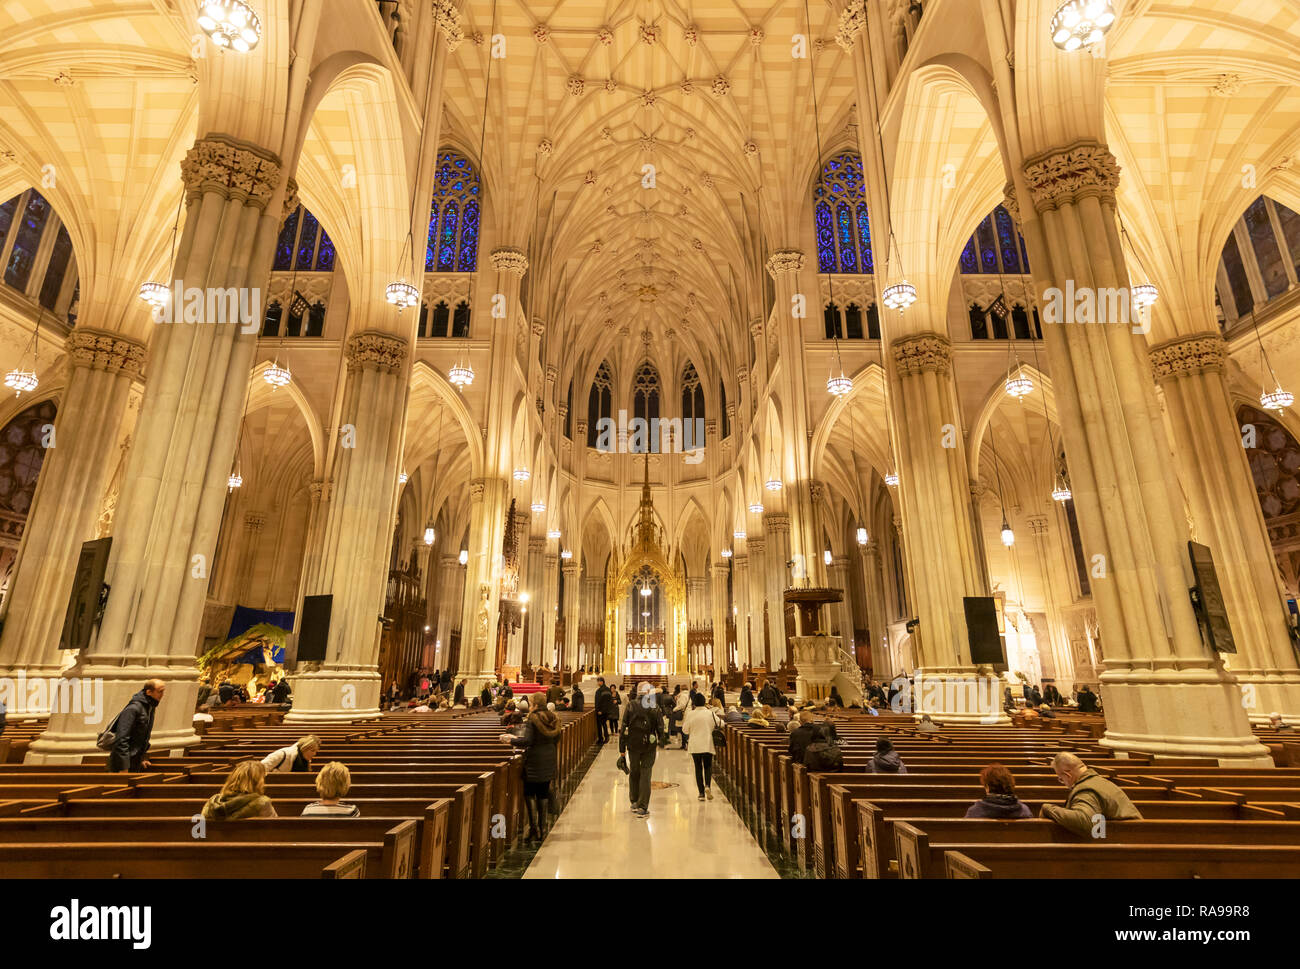 Interior view of tourists and the faithful visiting St. Patrick's Catheldral, New York City. Stock Photo